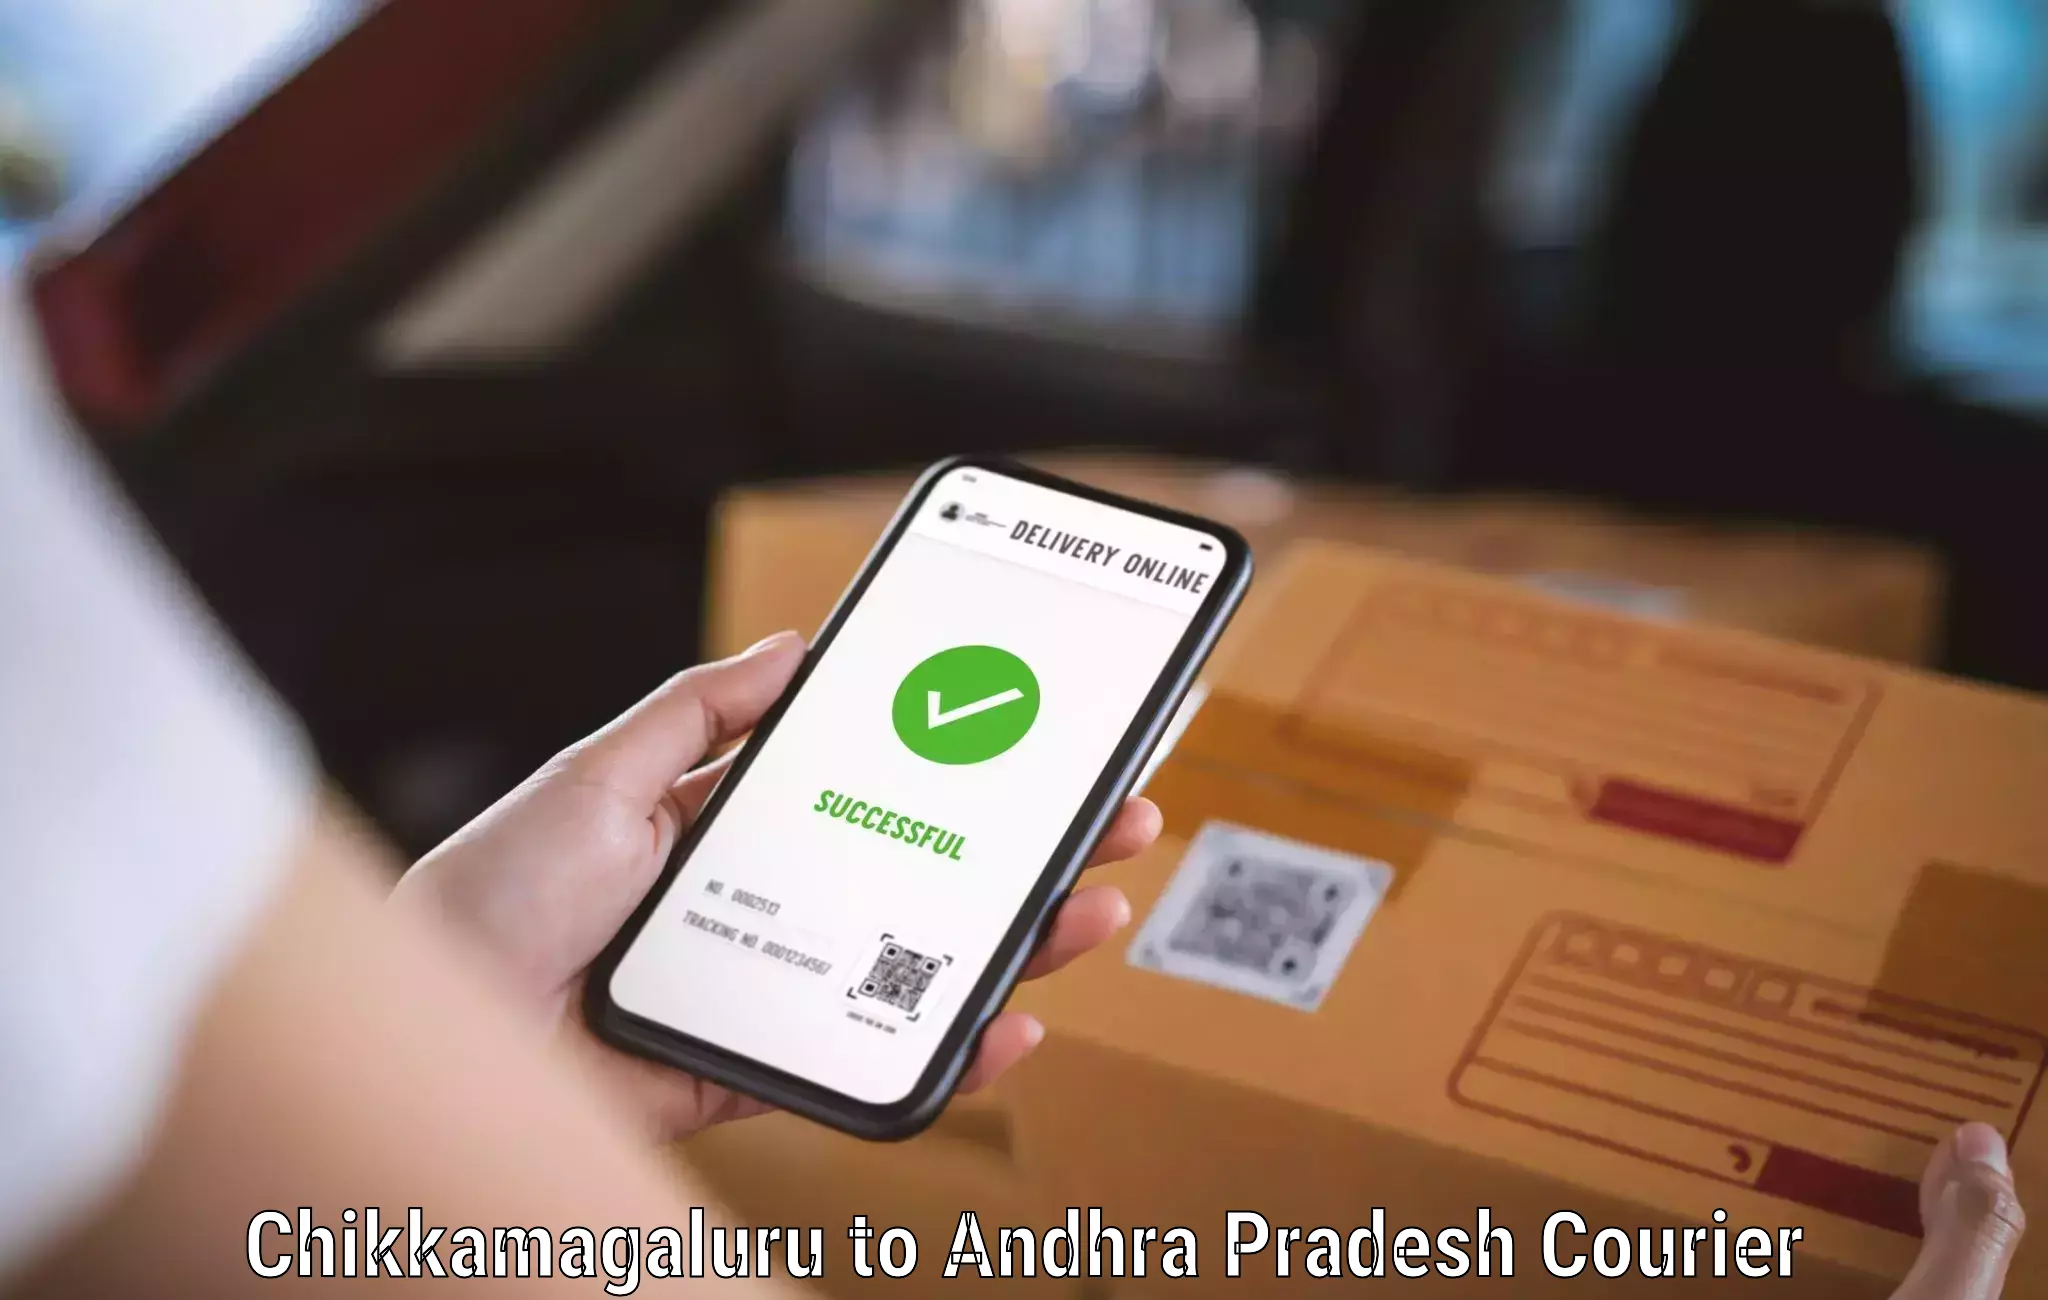 User-friendly delivery service Chikkamagaluru to Addateegala